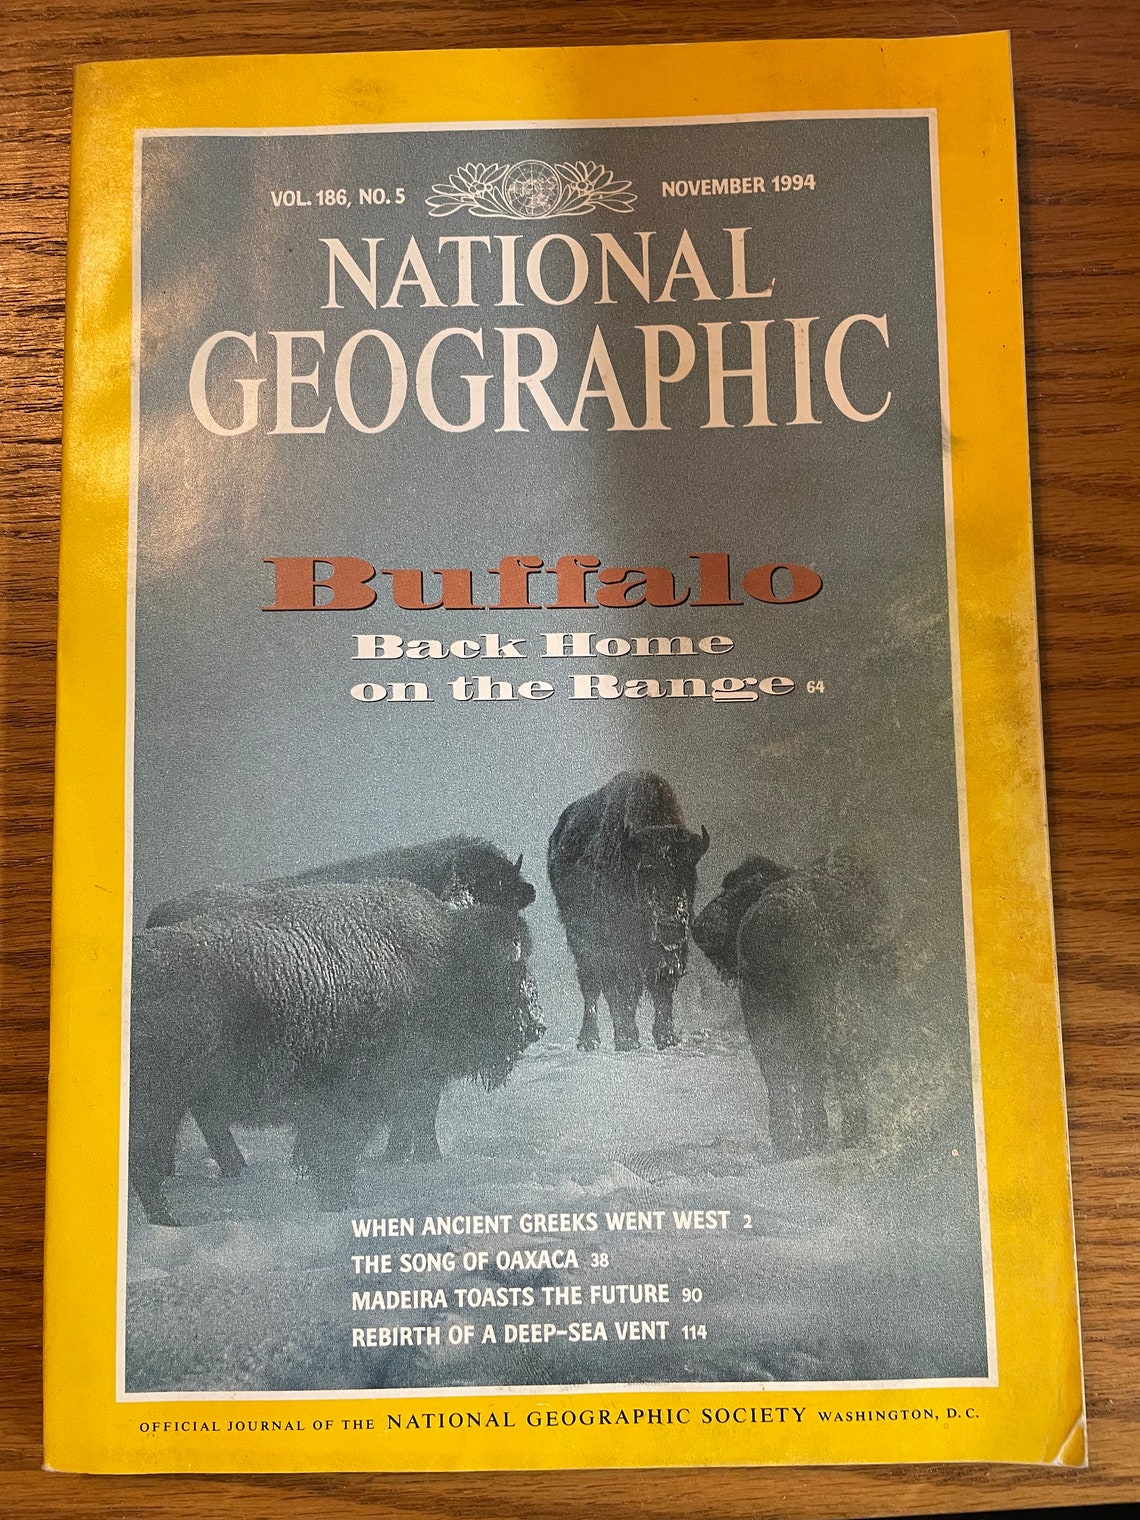 National Geographic 1994 Issues Volumes 185 & 186 | Etsy